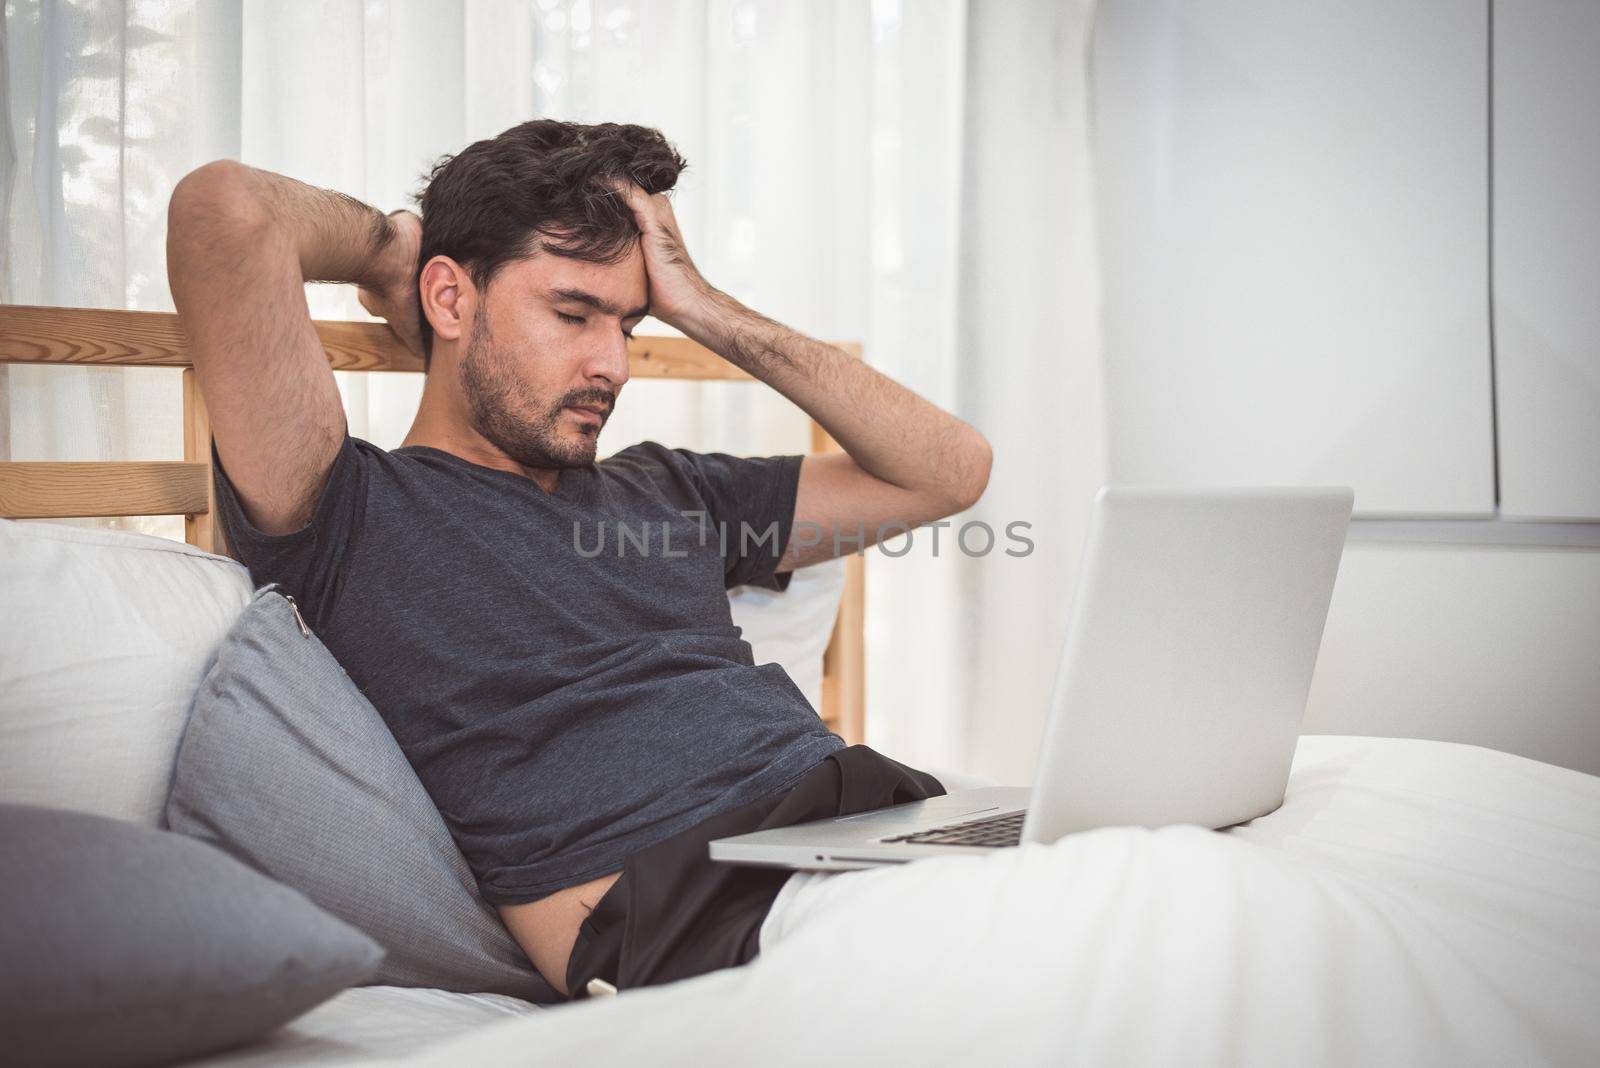 Man stressed out from work with laptop in bedroom. Technology and lifestyle concept. Social issues and problem. Healthcare and Office syndrome. Economic downturn and Critical deadline crisis theme.